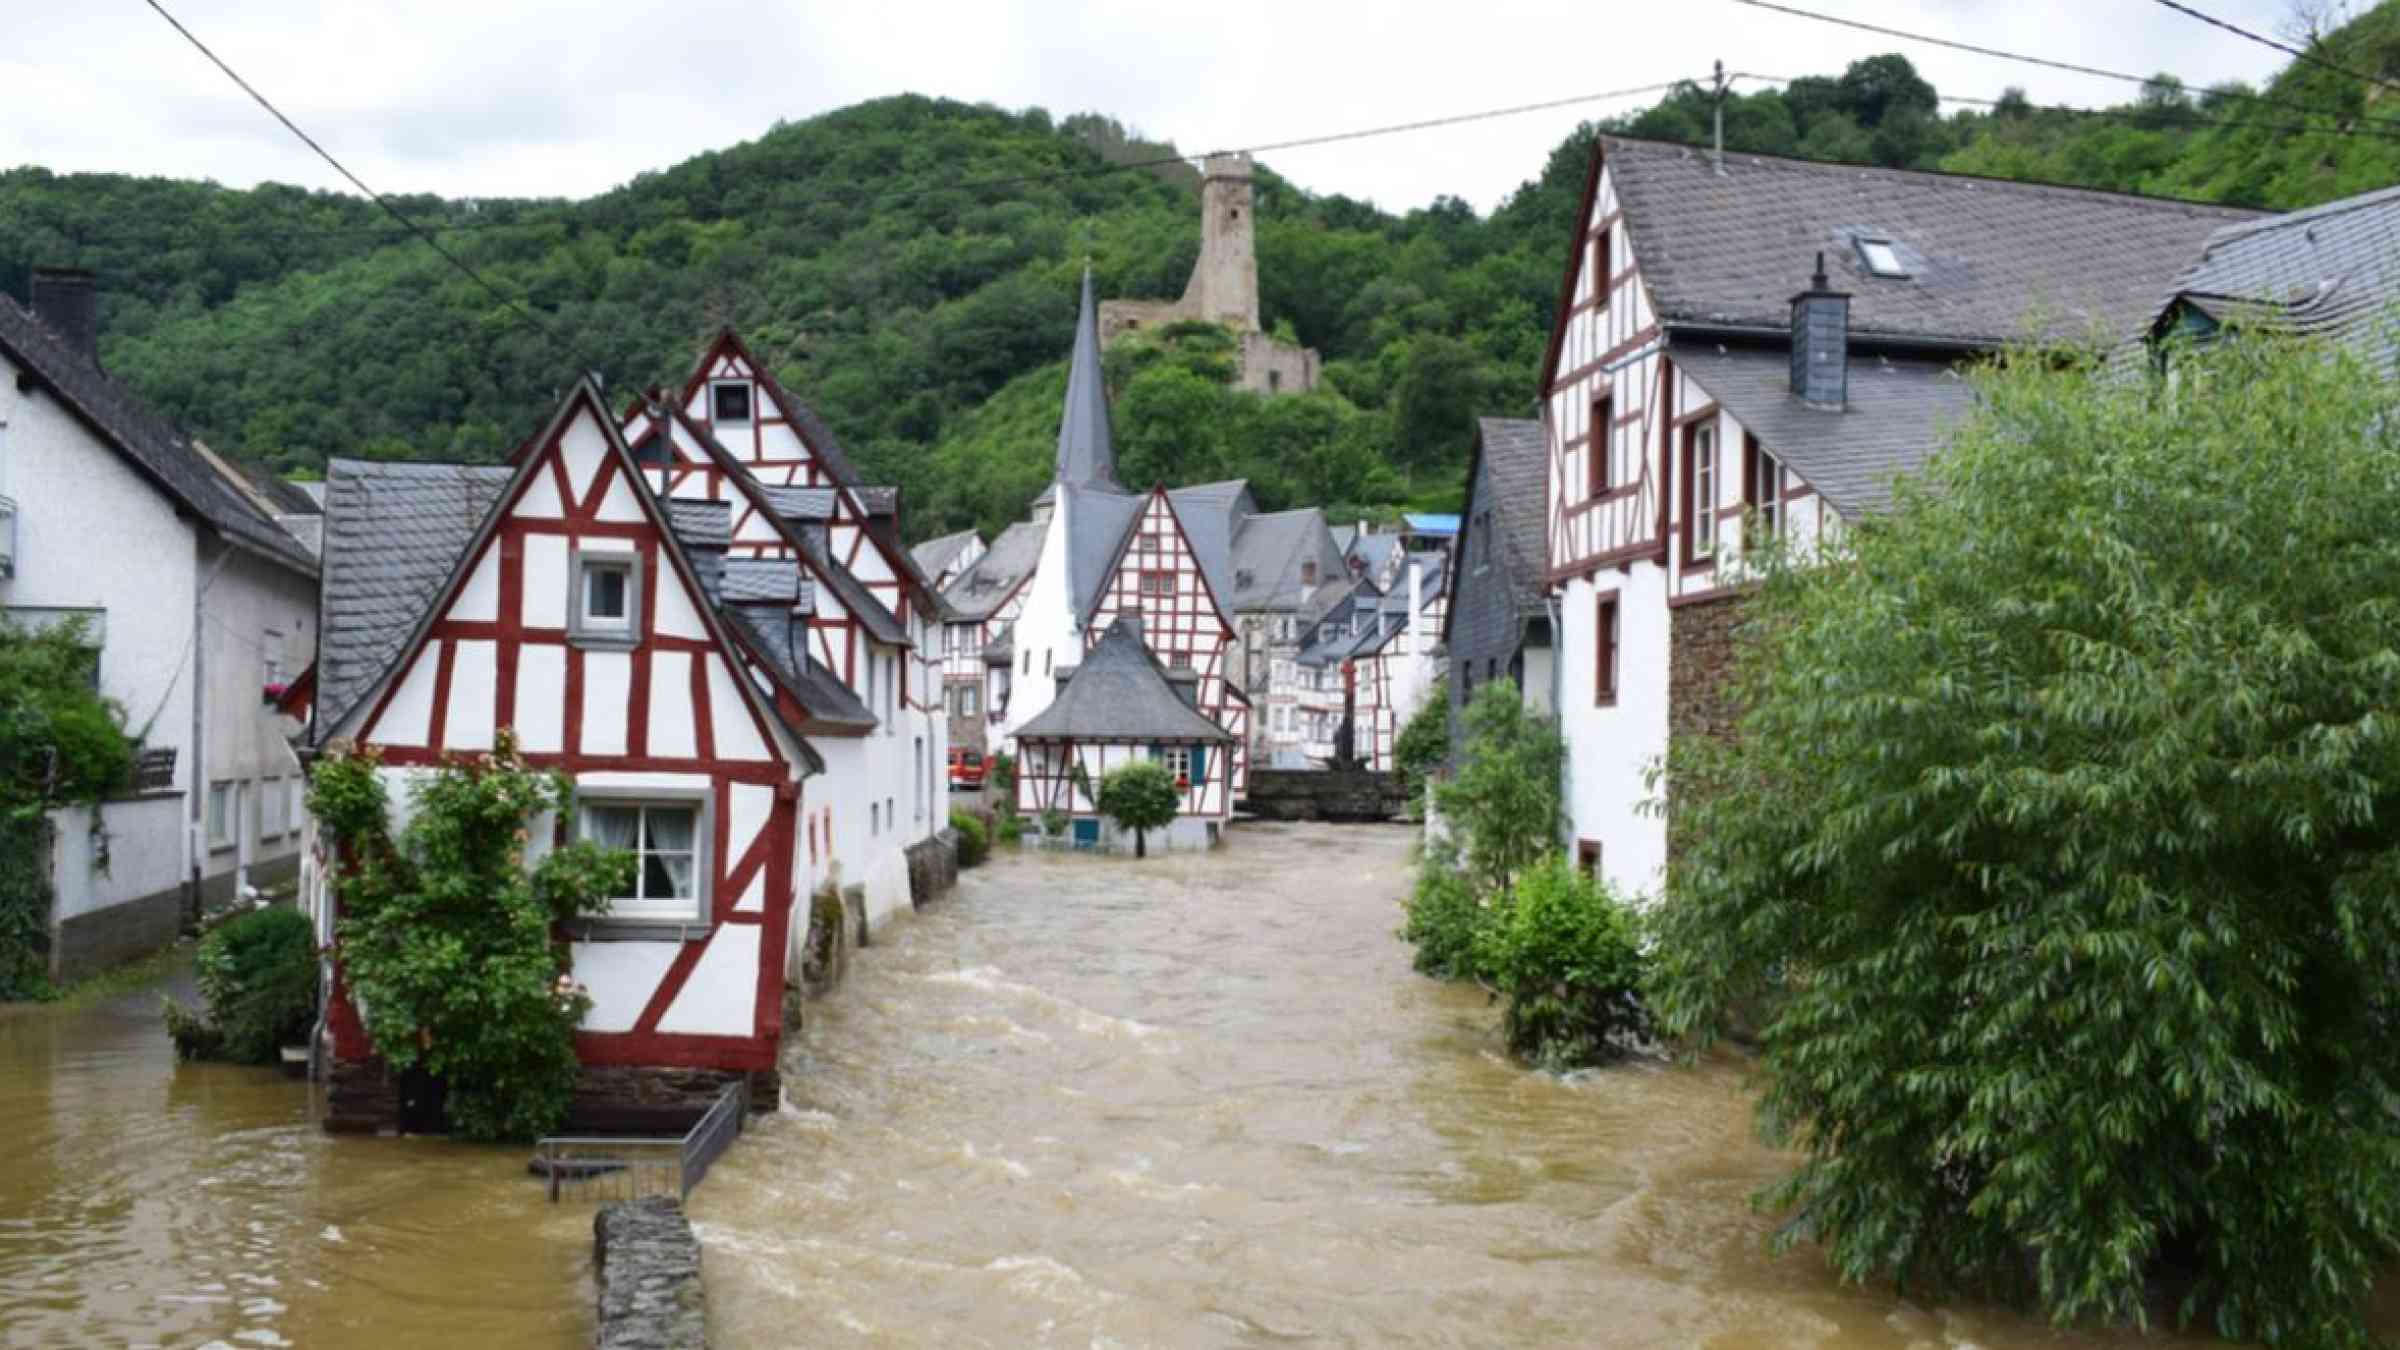 Streets in German town covered by flood waters 